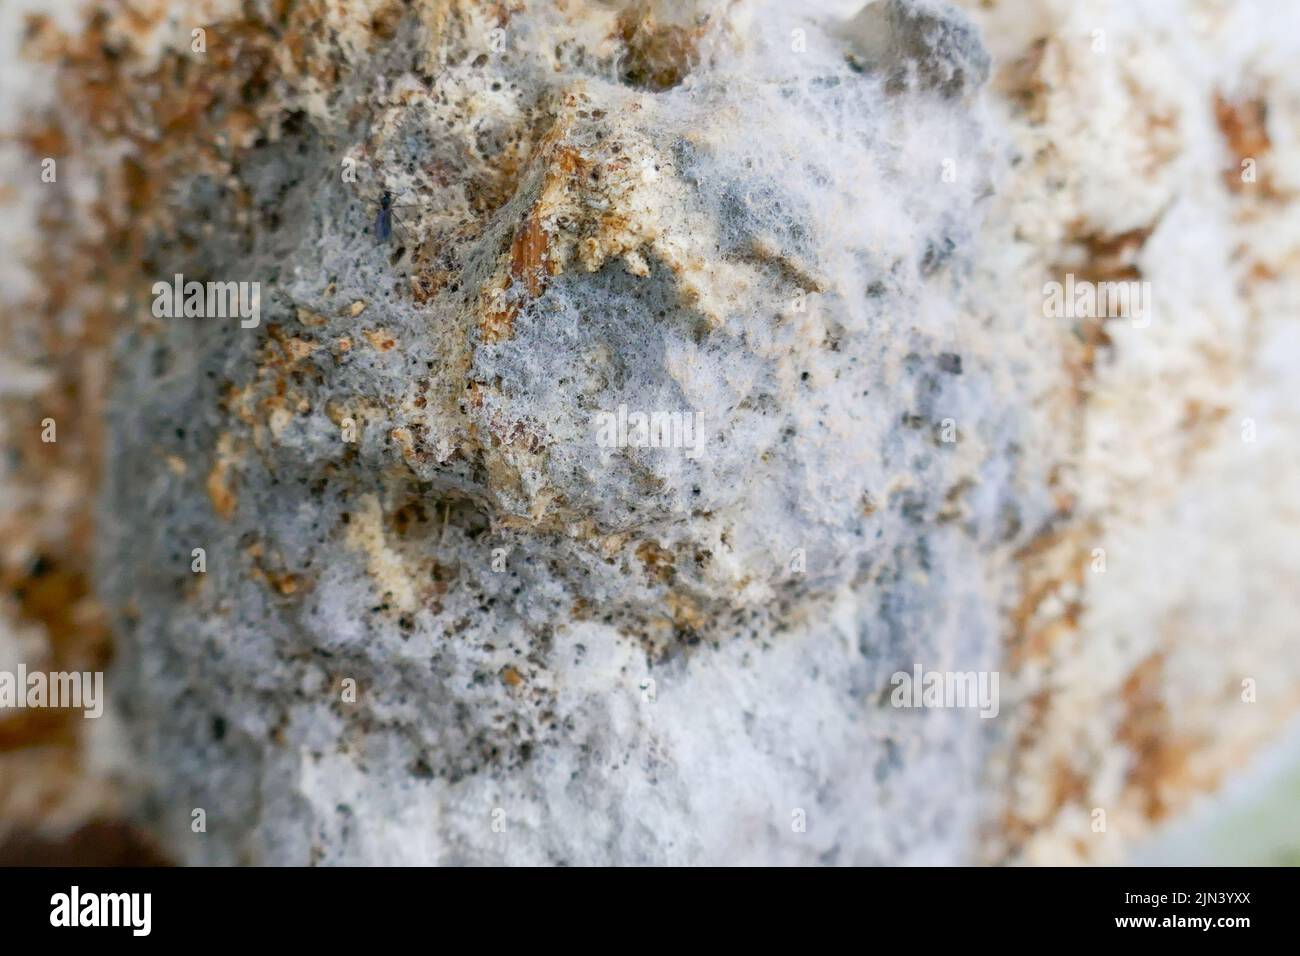 Mold close-up. Mold texture. Gray and brown mold close-up. fungal diseases Stock Photo